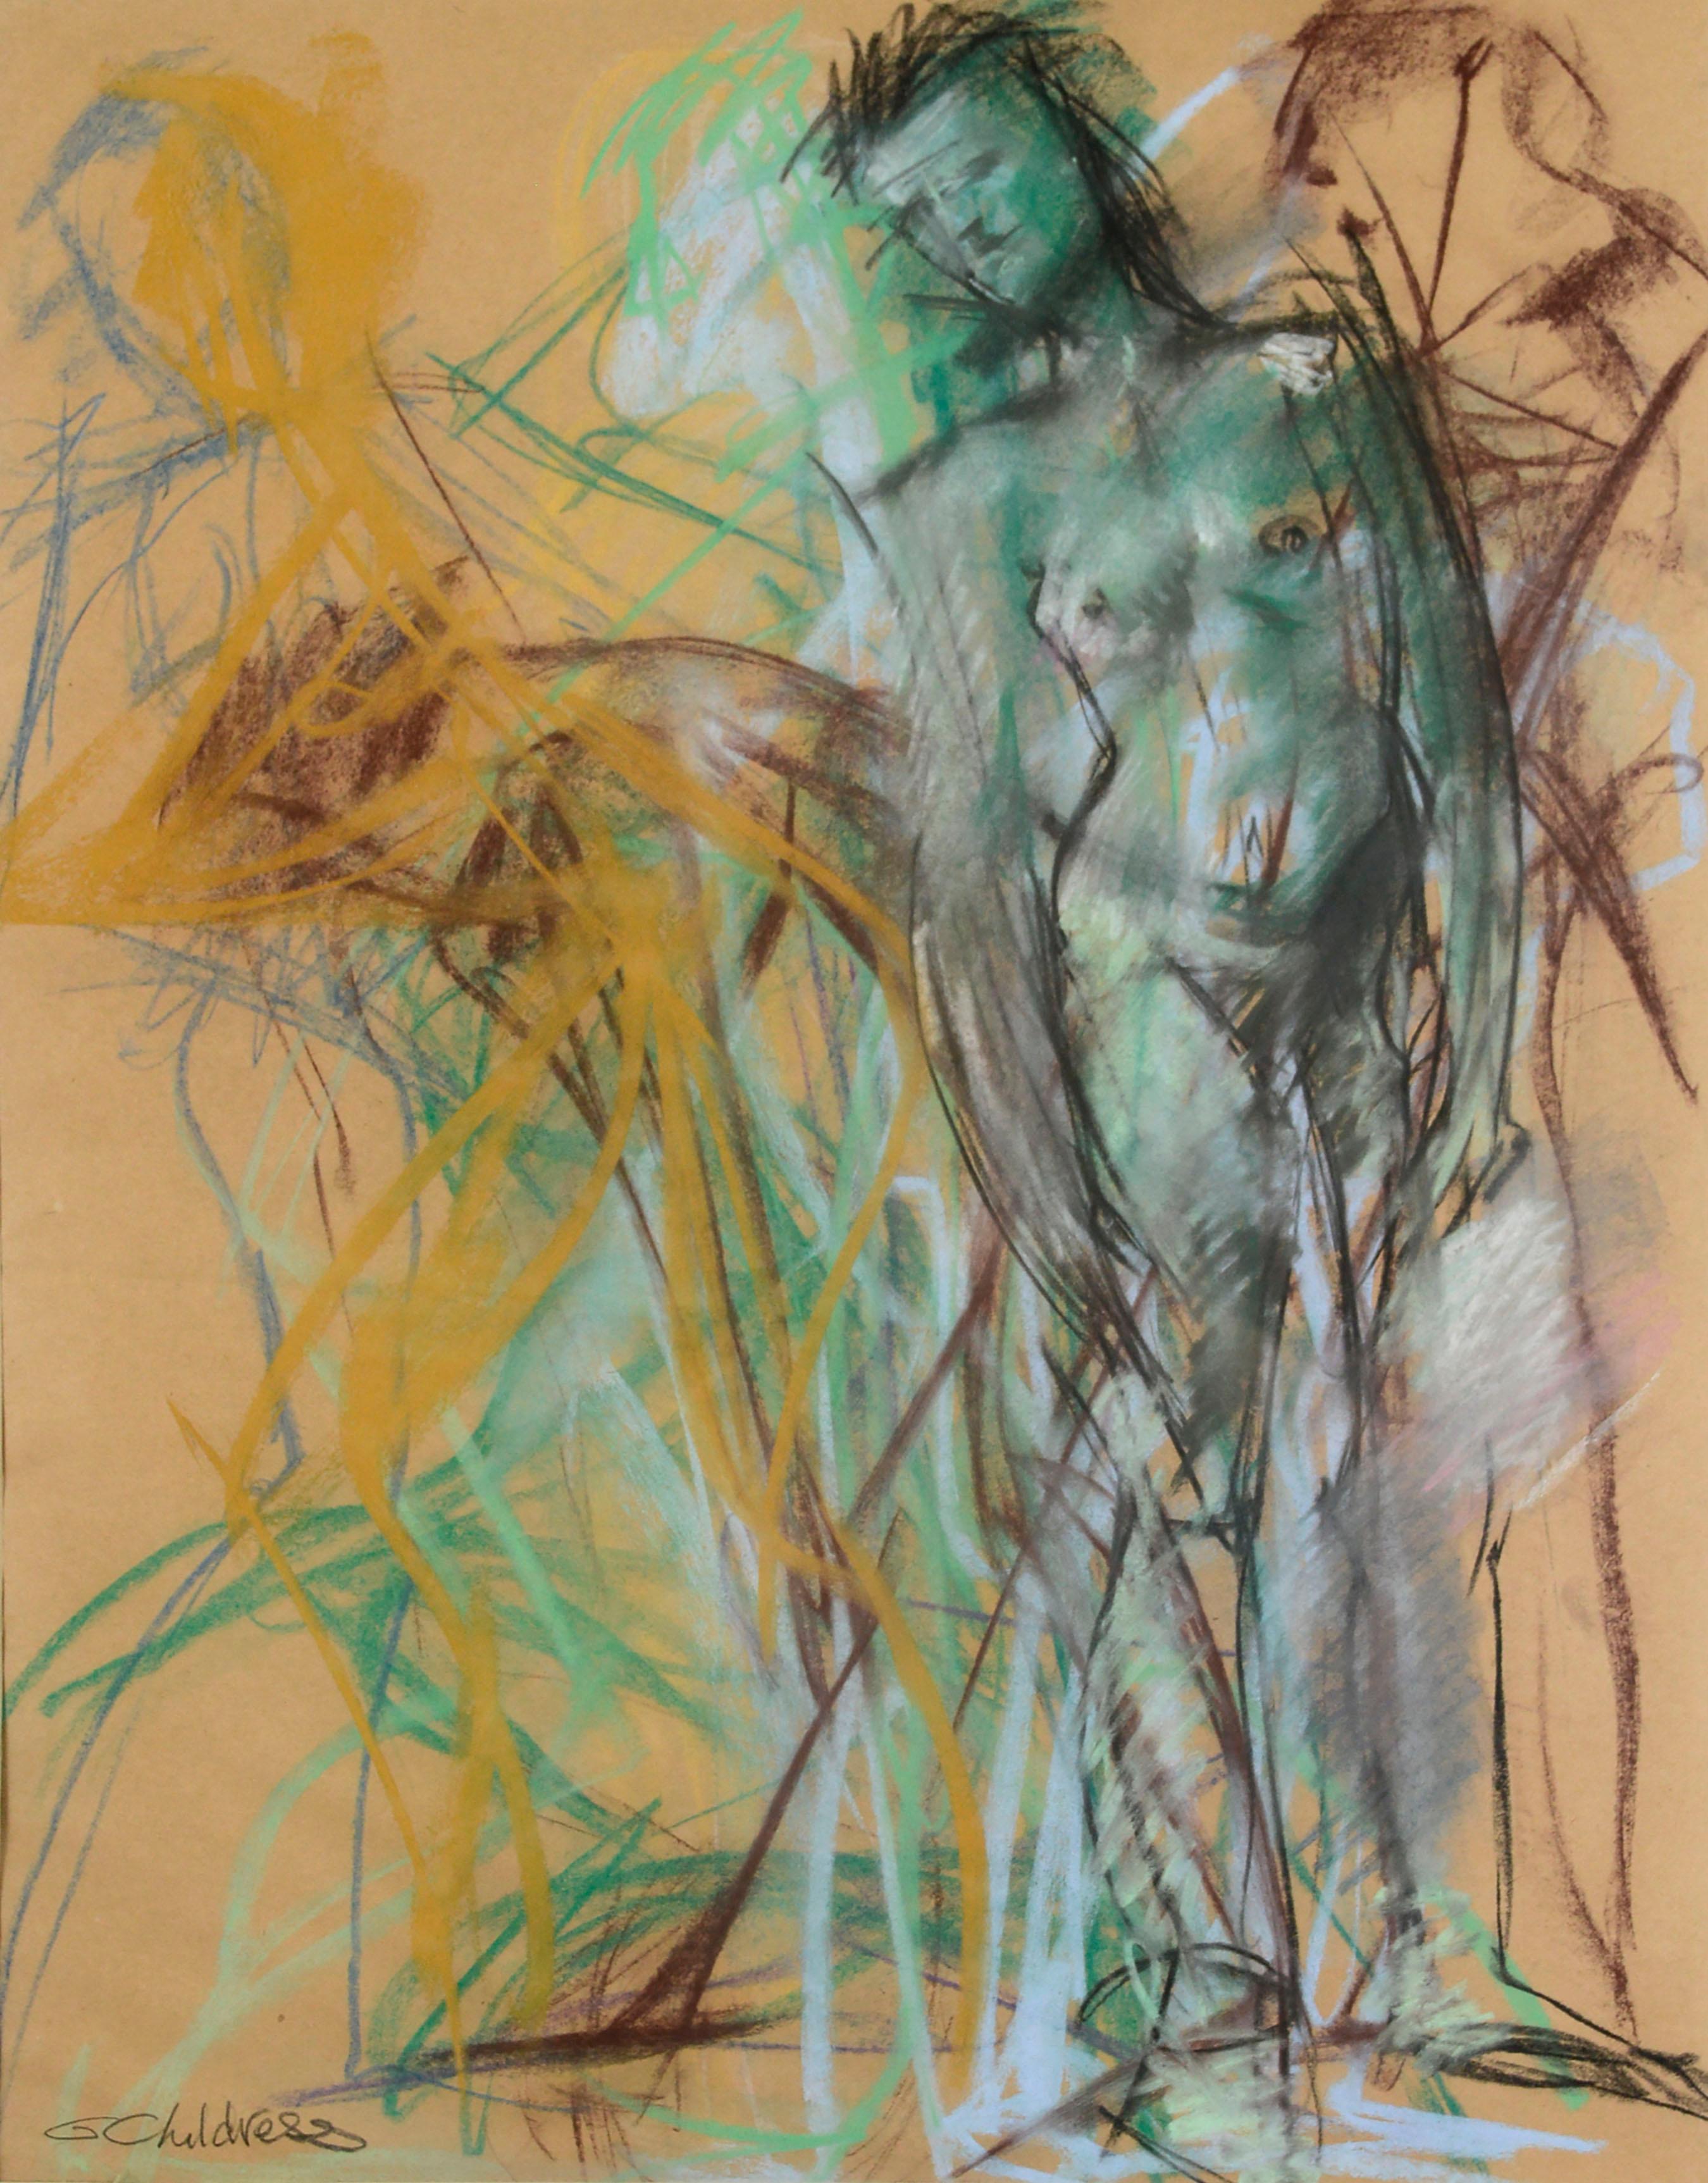 Figures in Motion, Abstract Expressionist Pastel Drawing  - Art by Gayel Childress